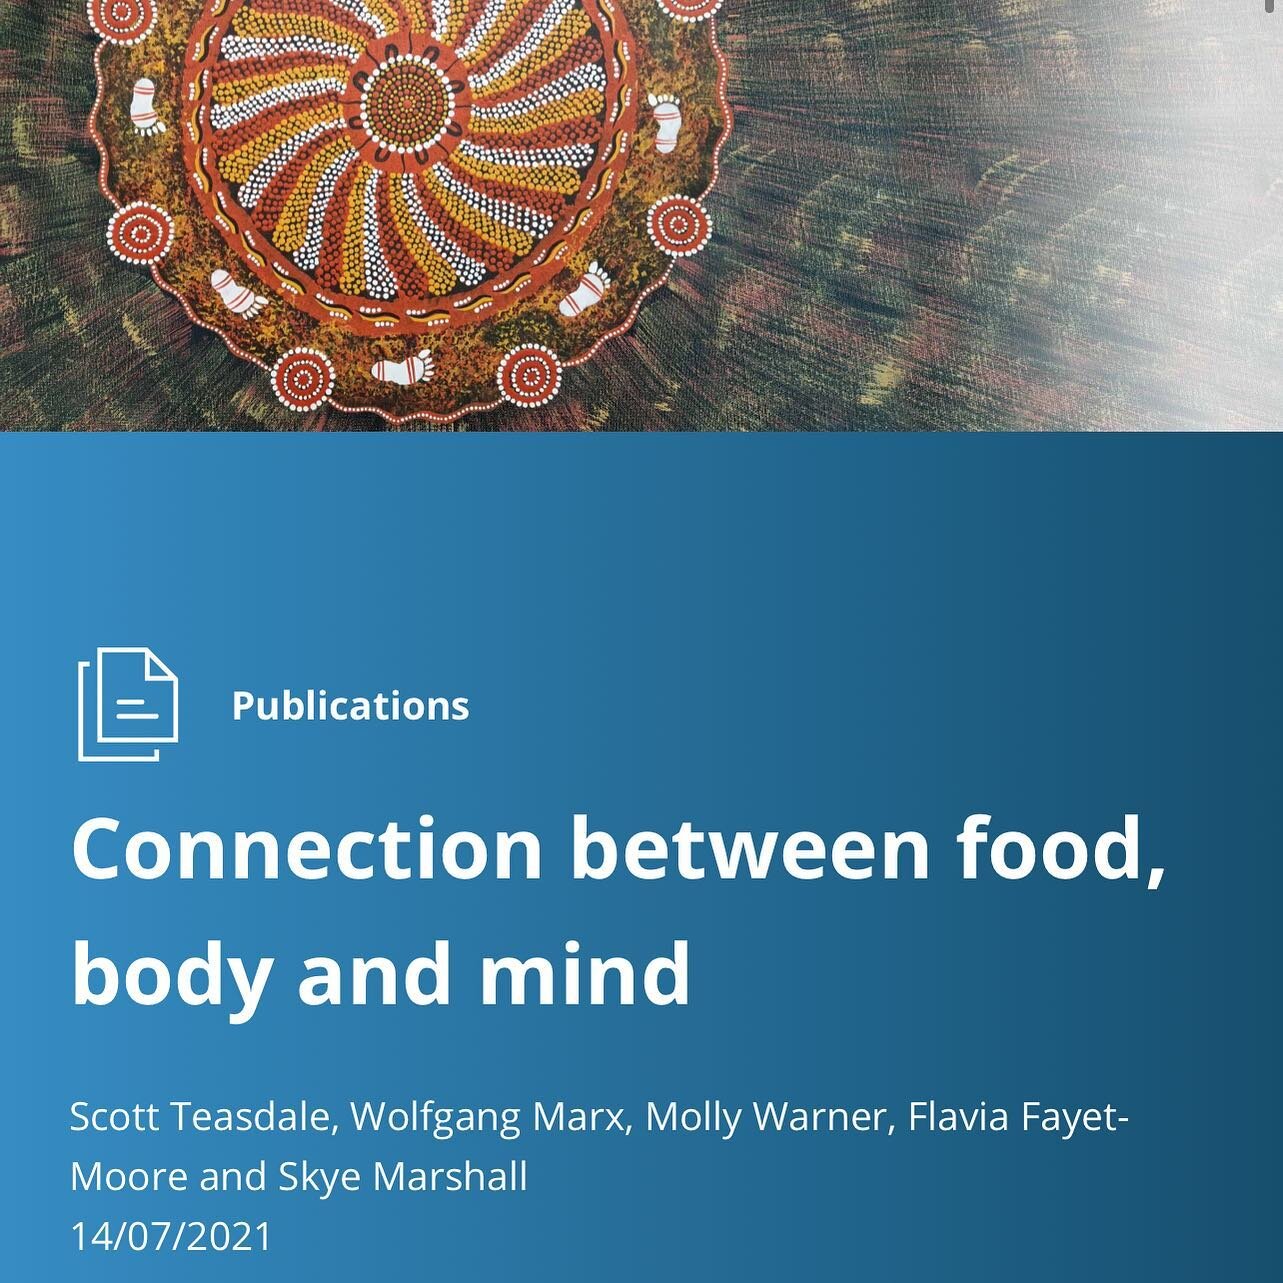 Hot off the press, our article on the connection between food, body and mind published today by the @aihw.gov.au 

Nutrition programs were more effective when they were culturally appropriate and community endorsed, co-designed with Elders. It is so 